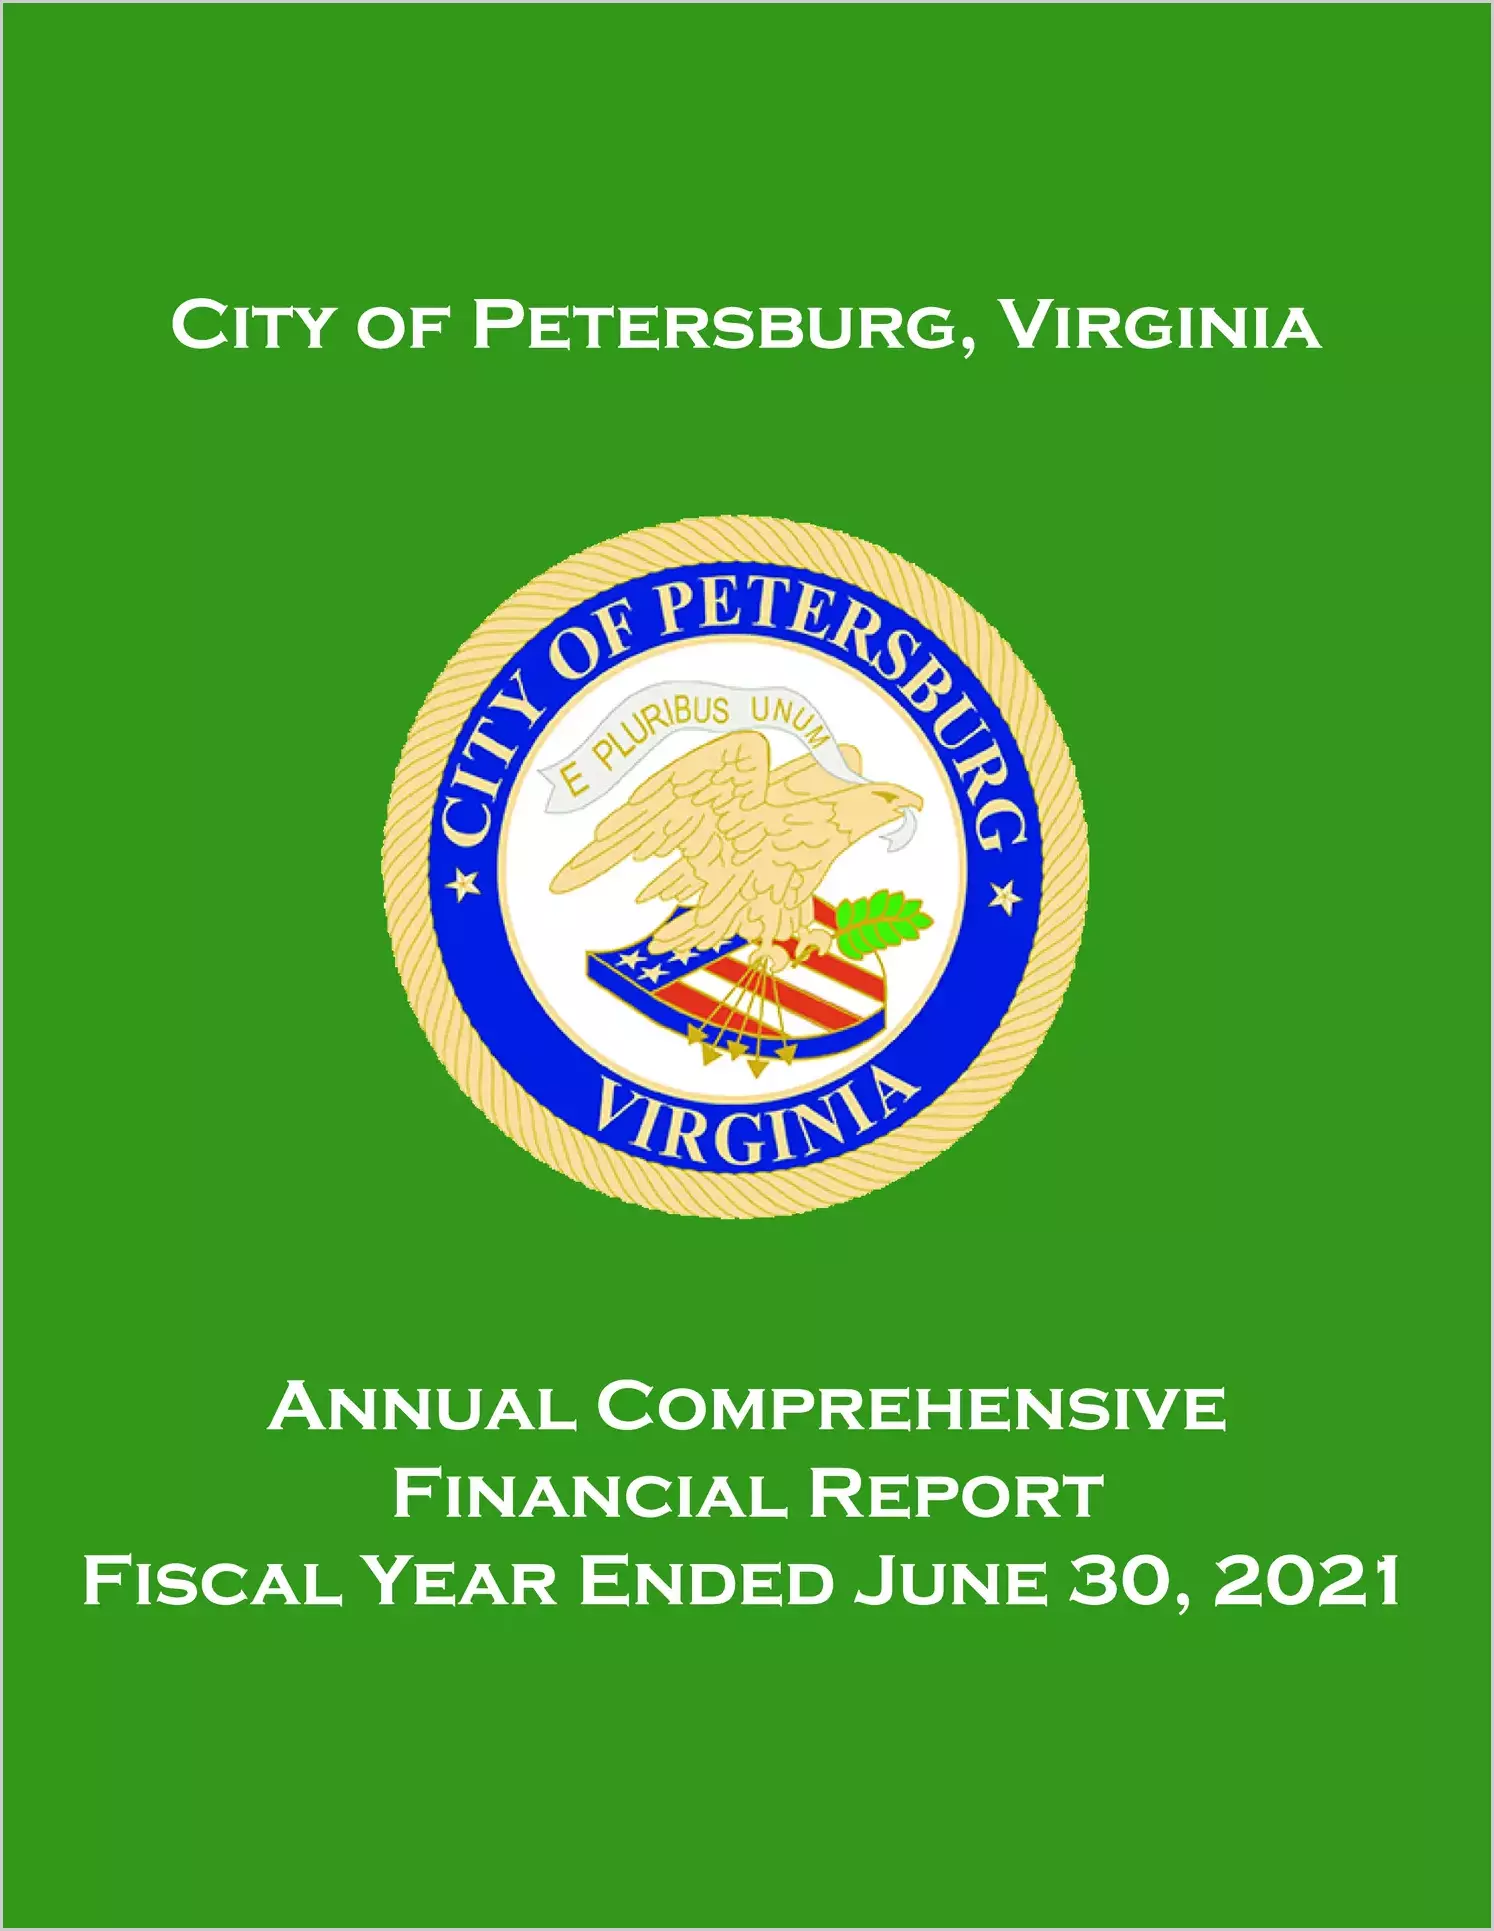 2021 Annual Financial Report for City of Petersburg